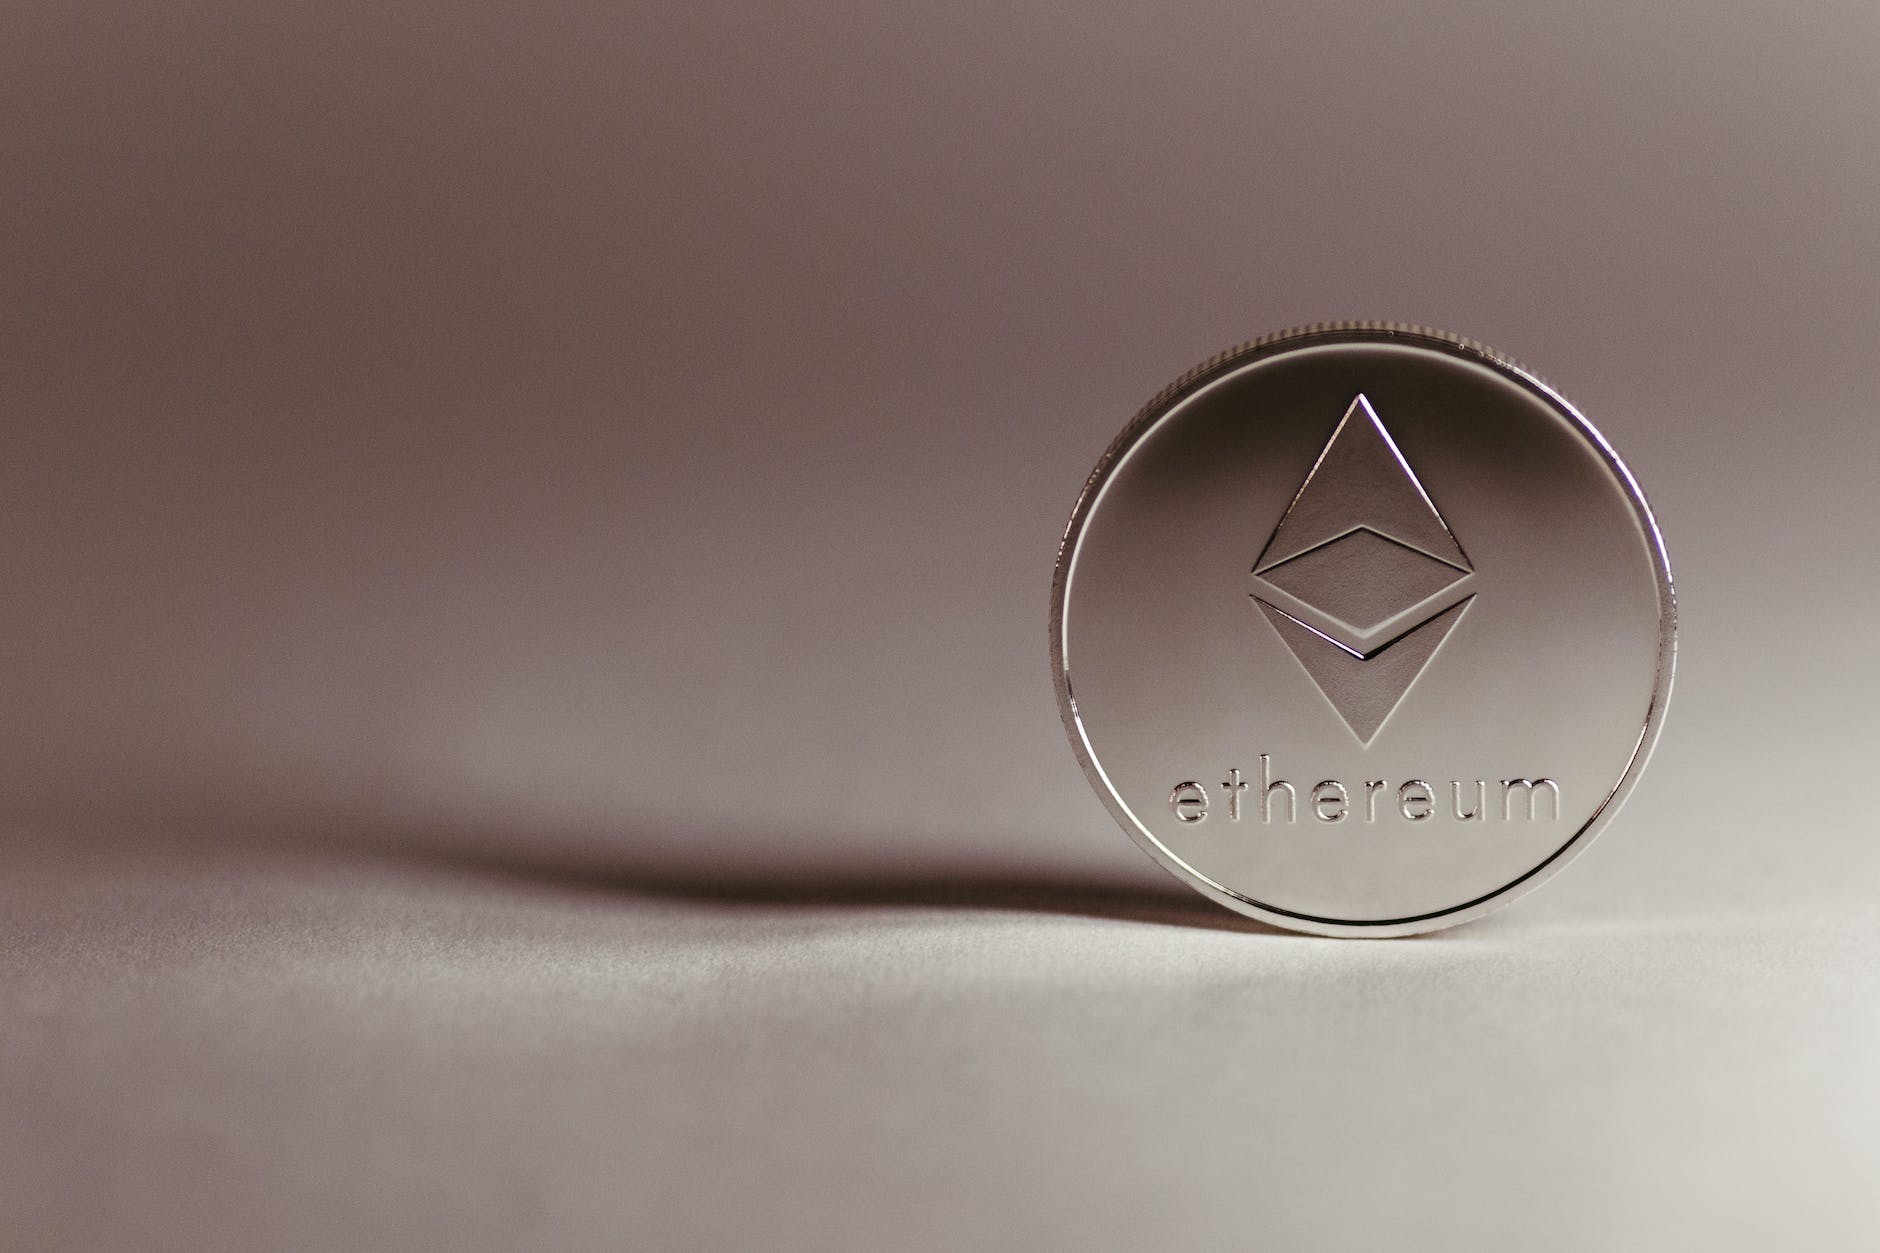 close up of etheroum crypto currency coin